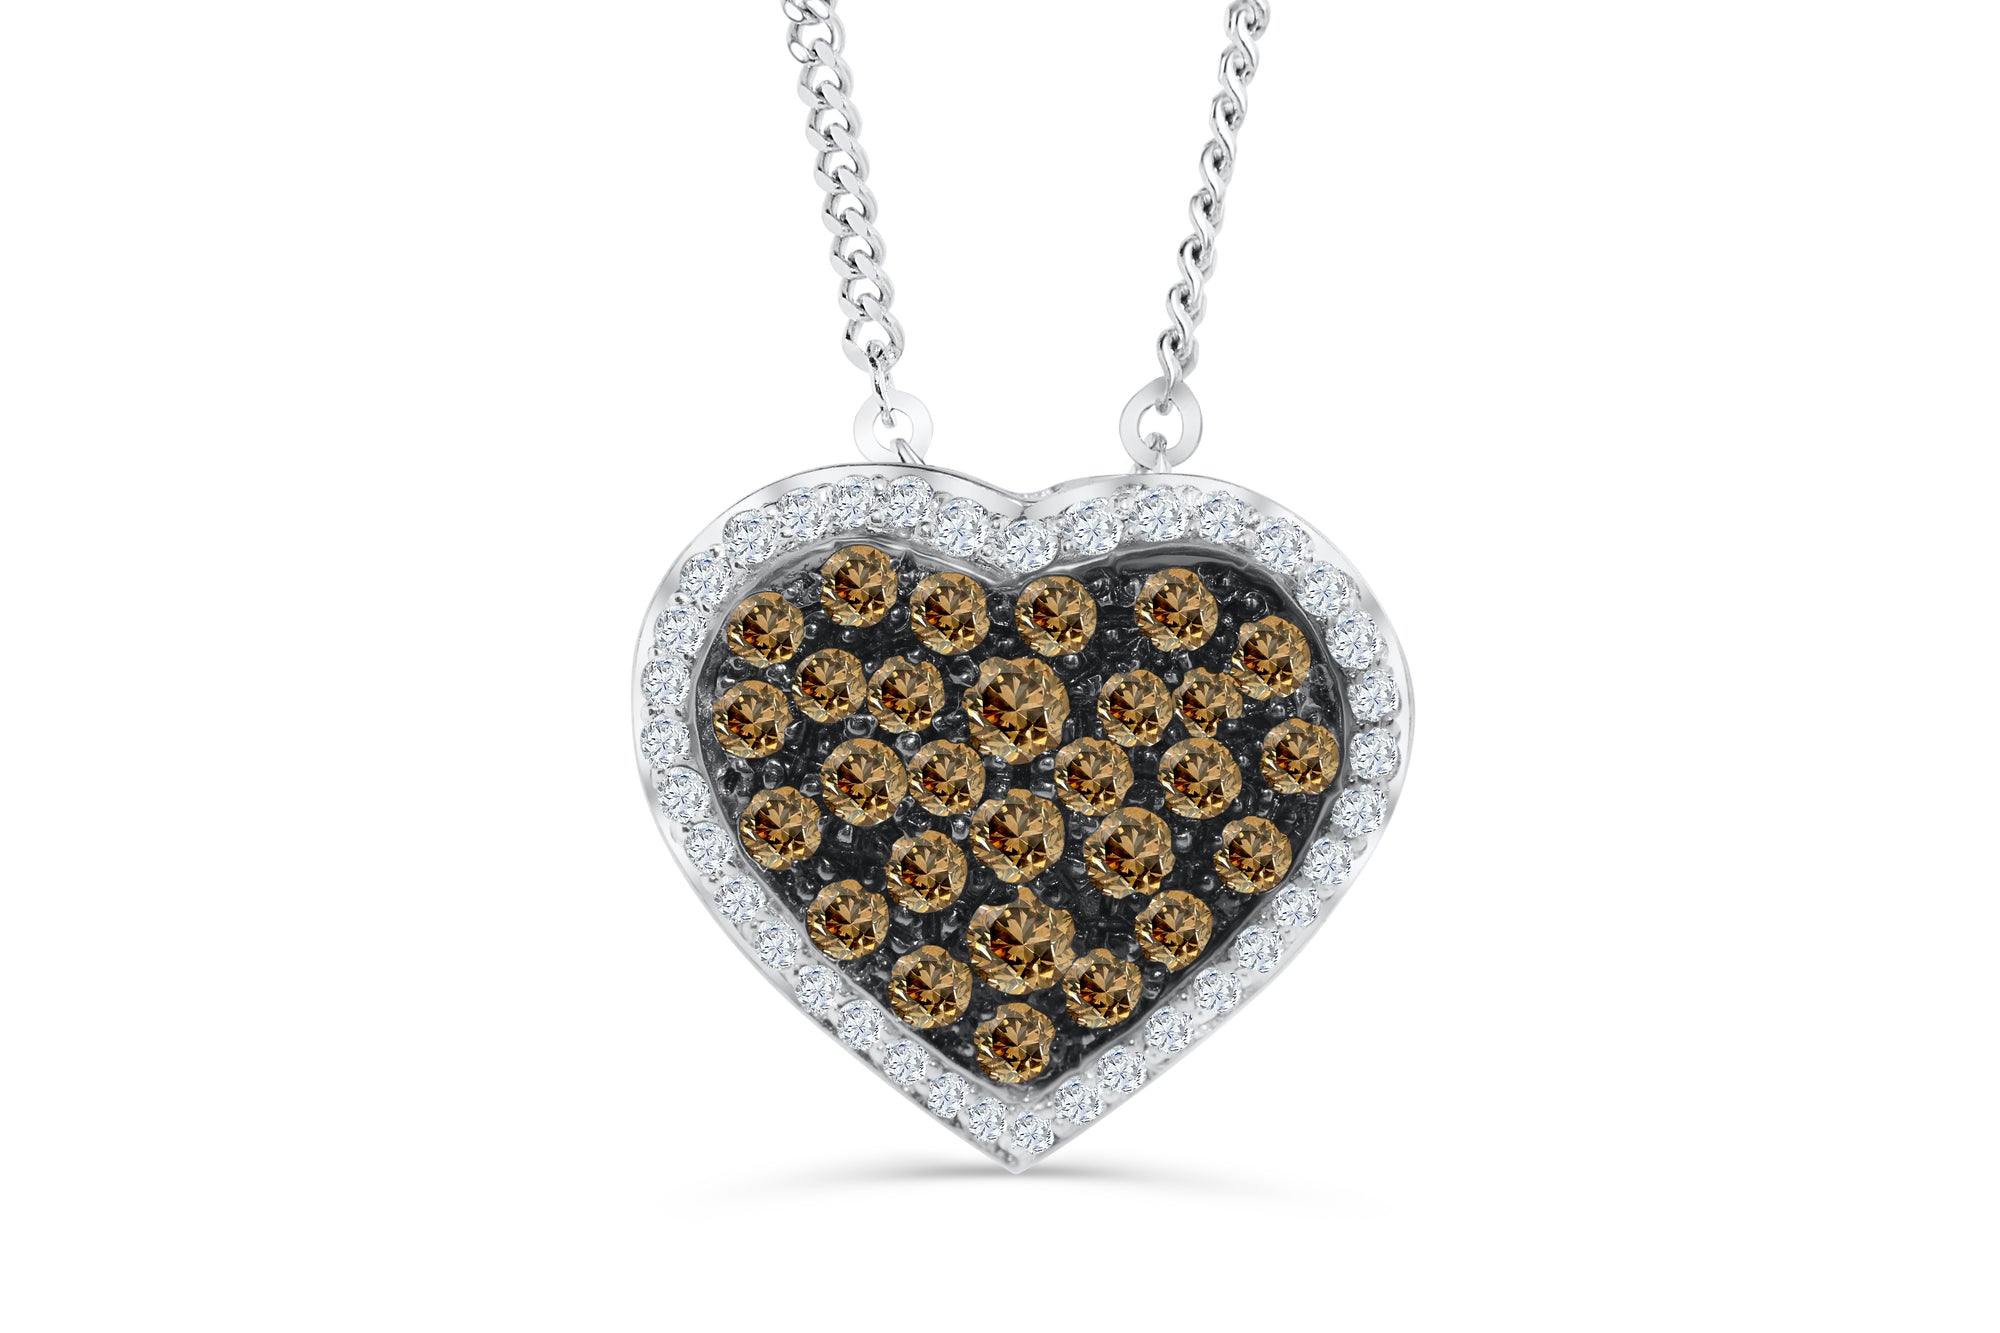 Pave Chocolate Diamond Heart Pendant 2.11 CT TW 14K White Gold DPEN045 - NorthandSouthJewelry